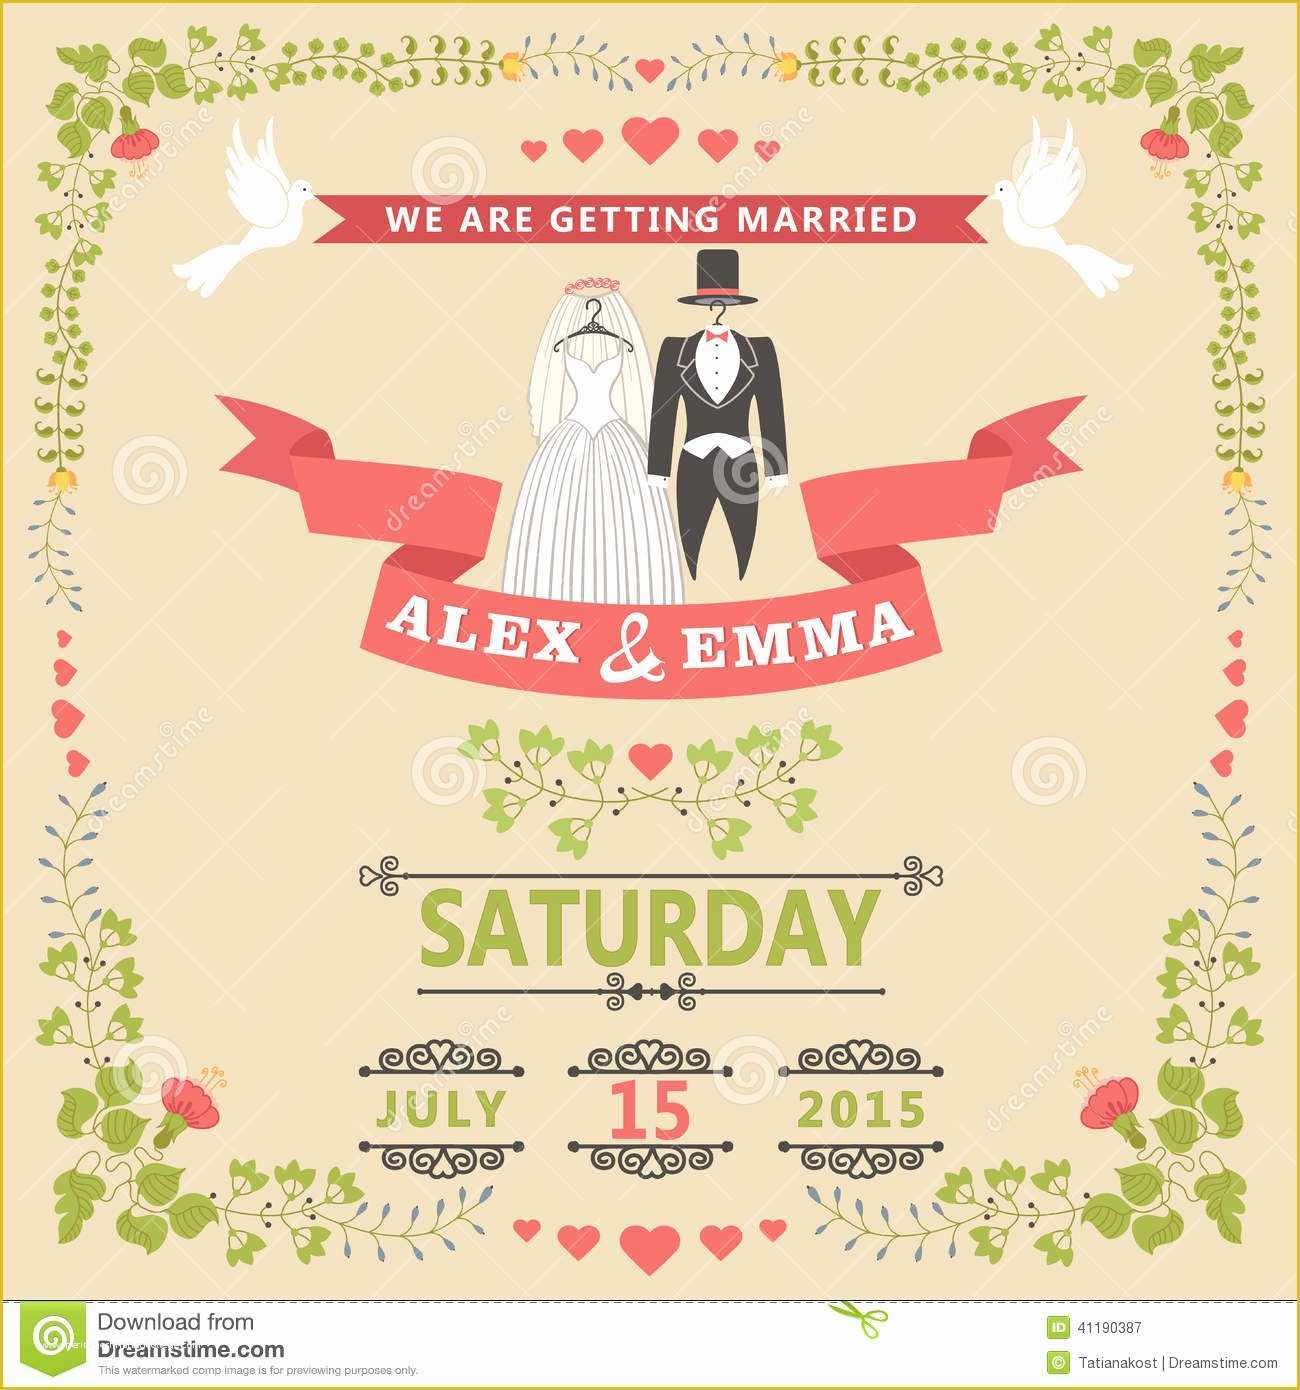 Free Save the Date Templates for Email Of Save the Date Invitation Templates